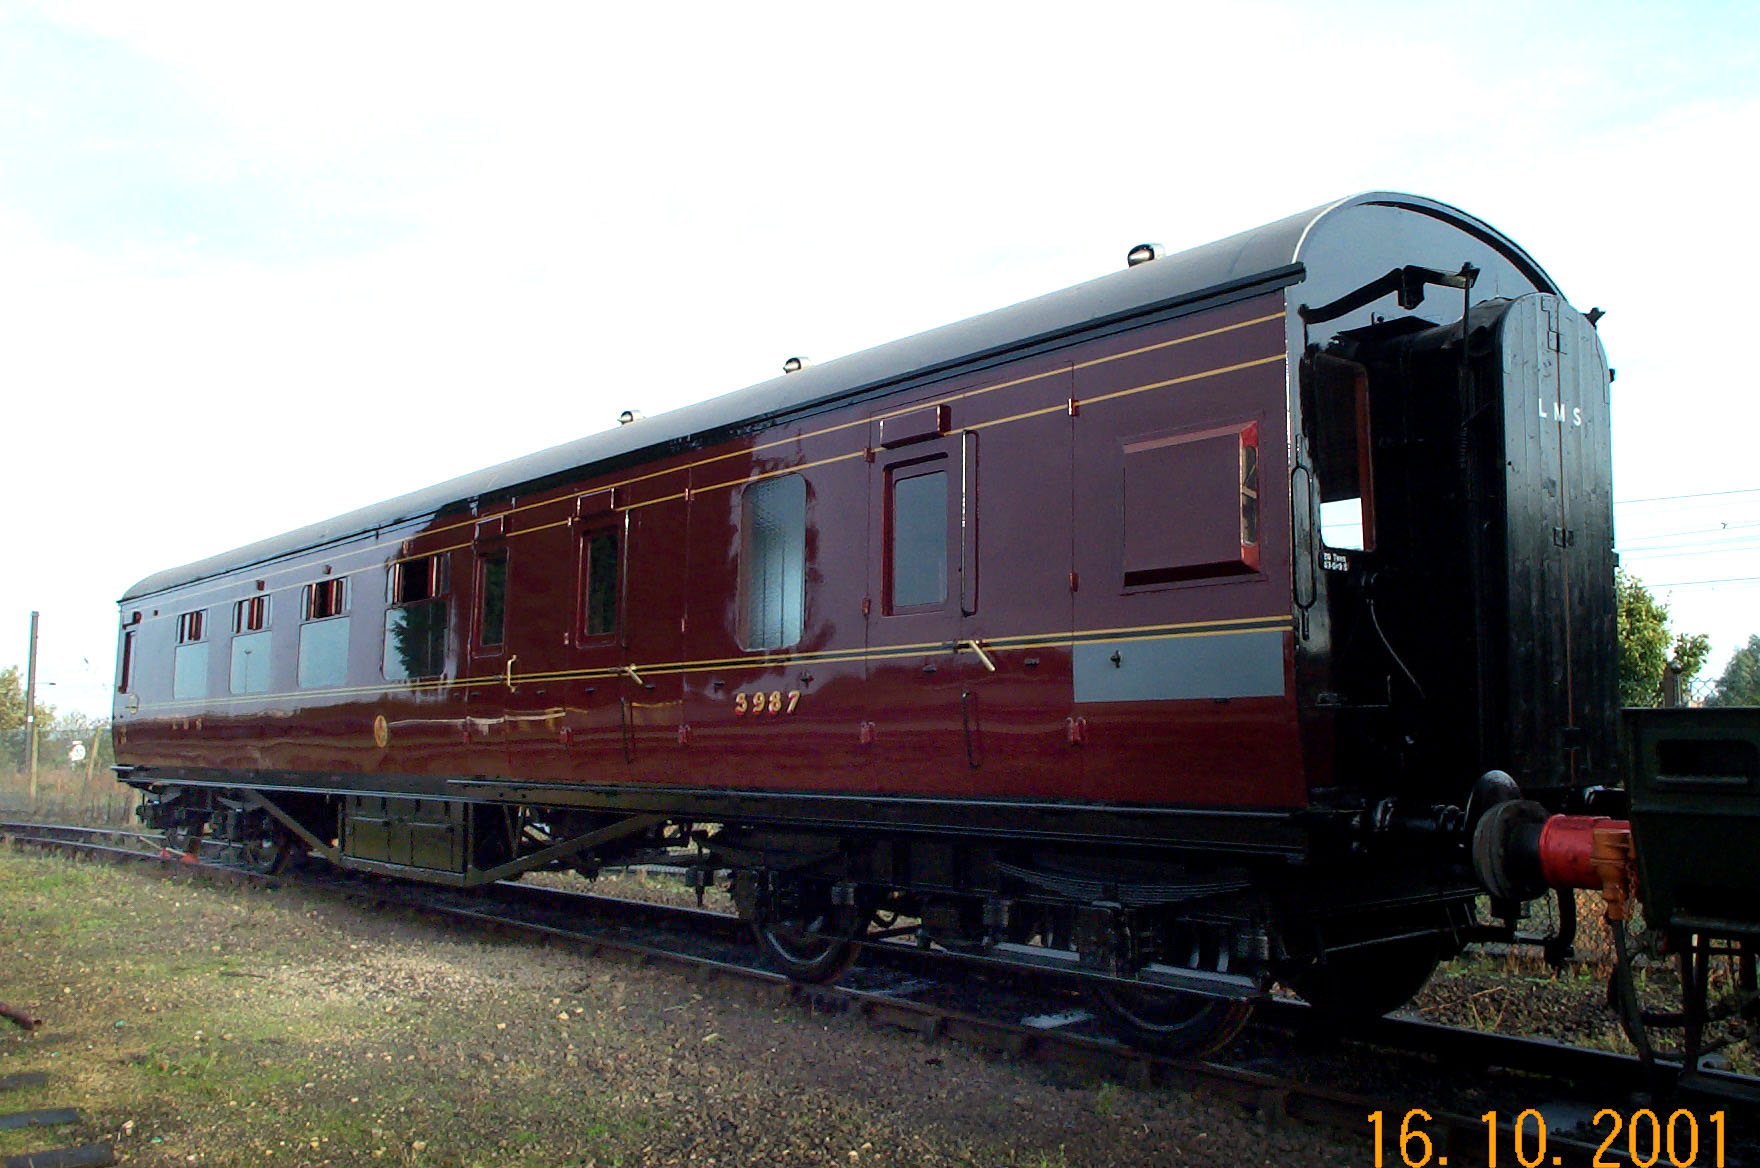 The 5987 LMS 3rd Brake in 2001 in Standard LMS Livery